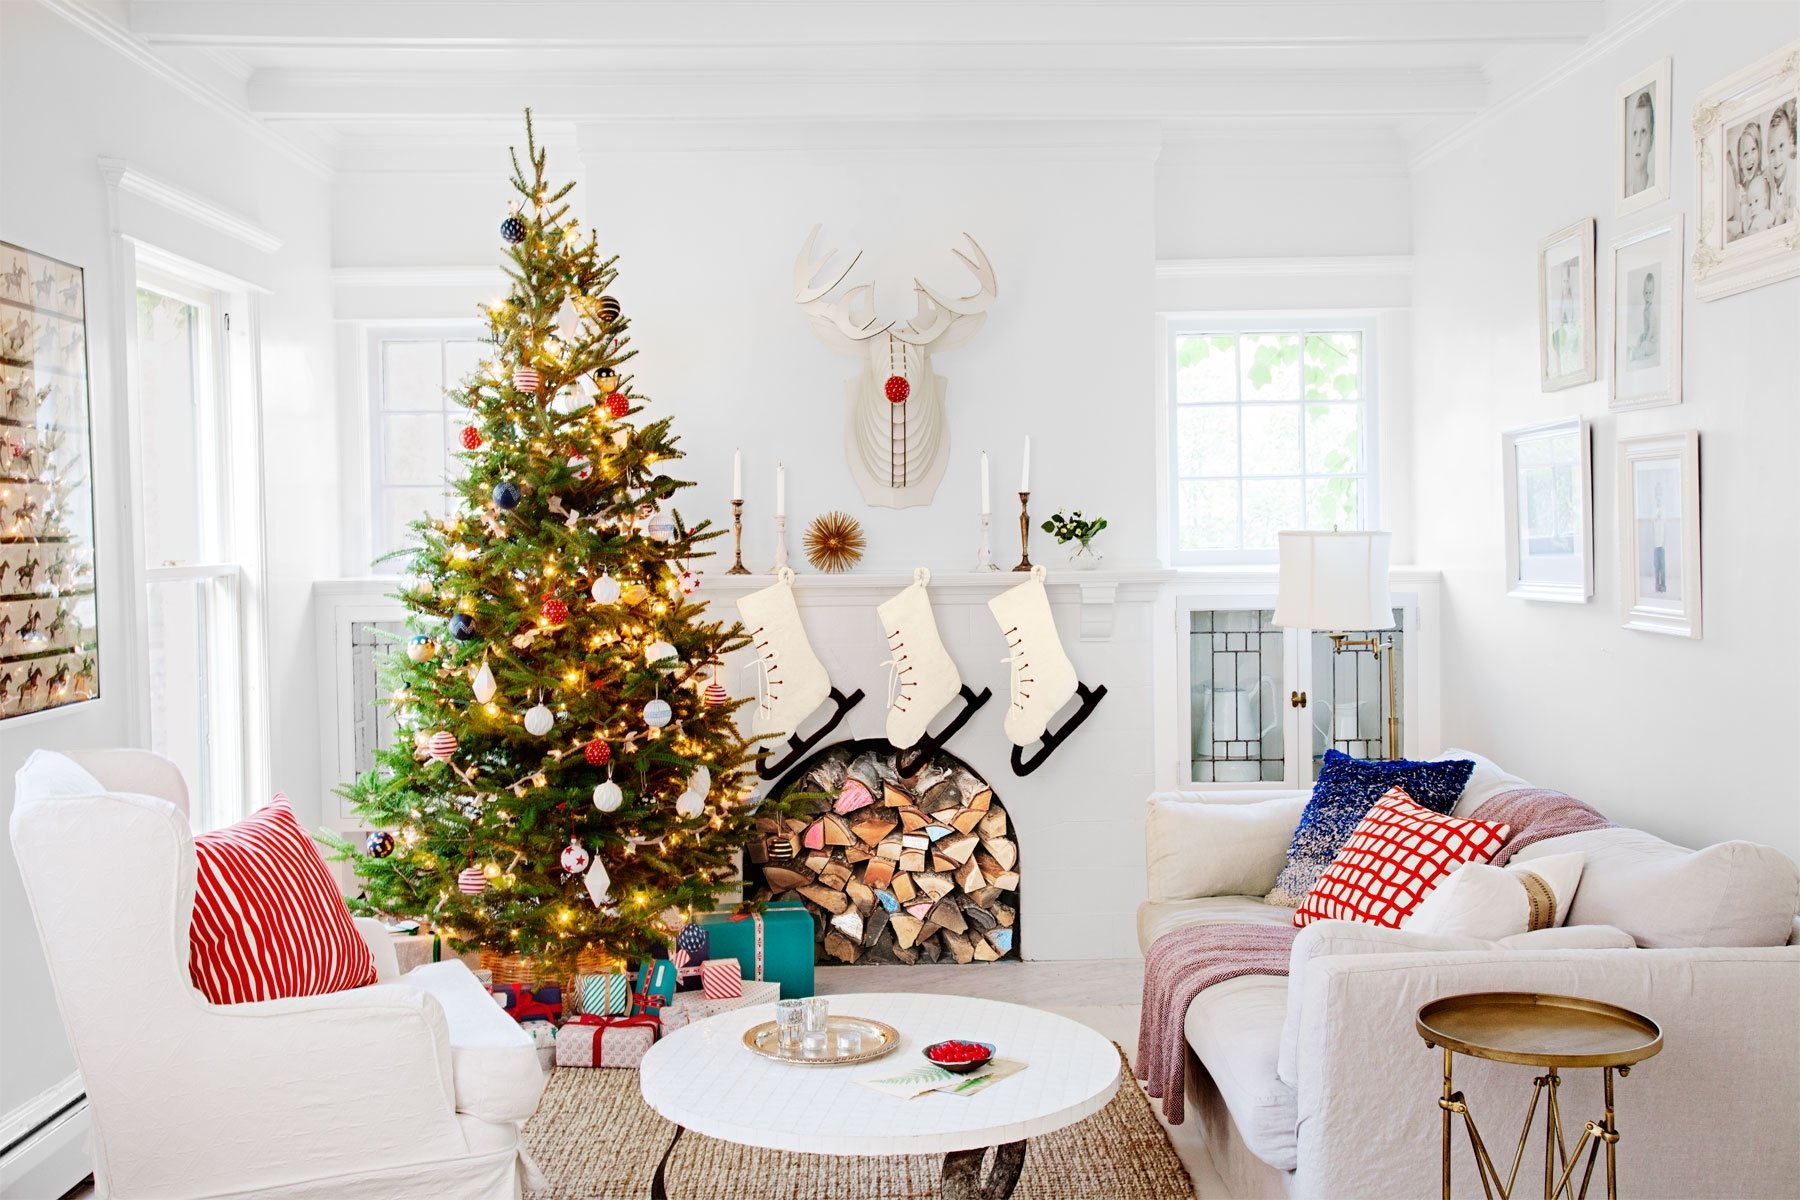 10 Perfect Decorating Ideas For Christmas 2013 christmas mantel decorations ideas for holiday fireplace decorating 2022